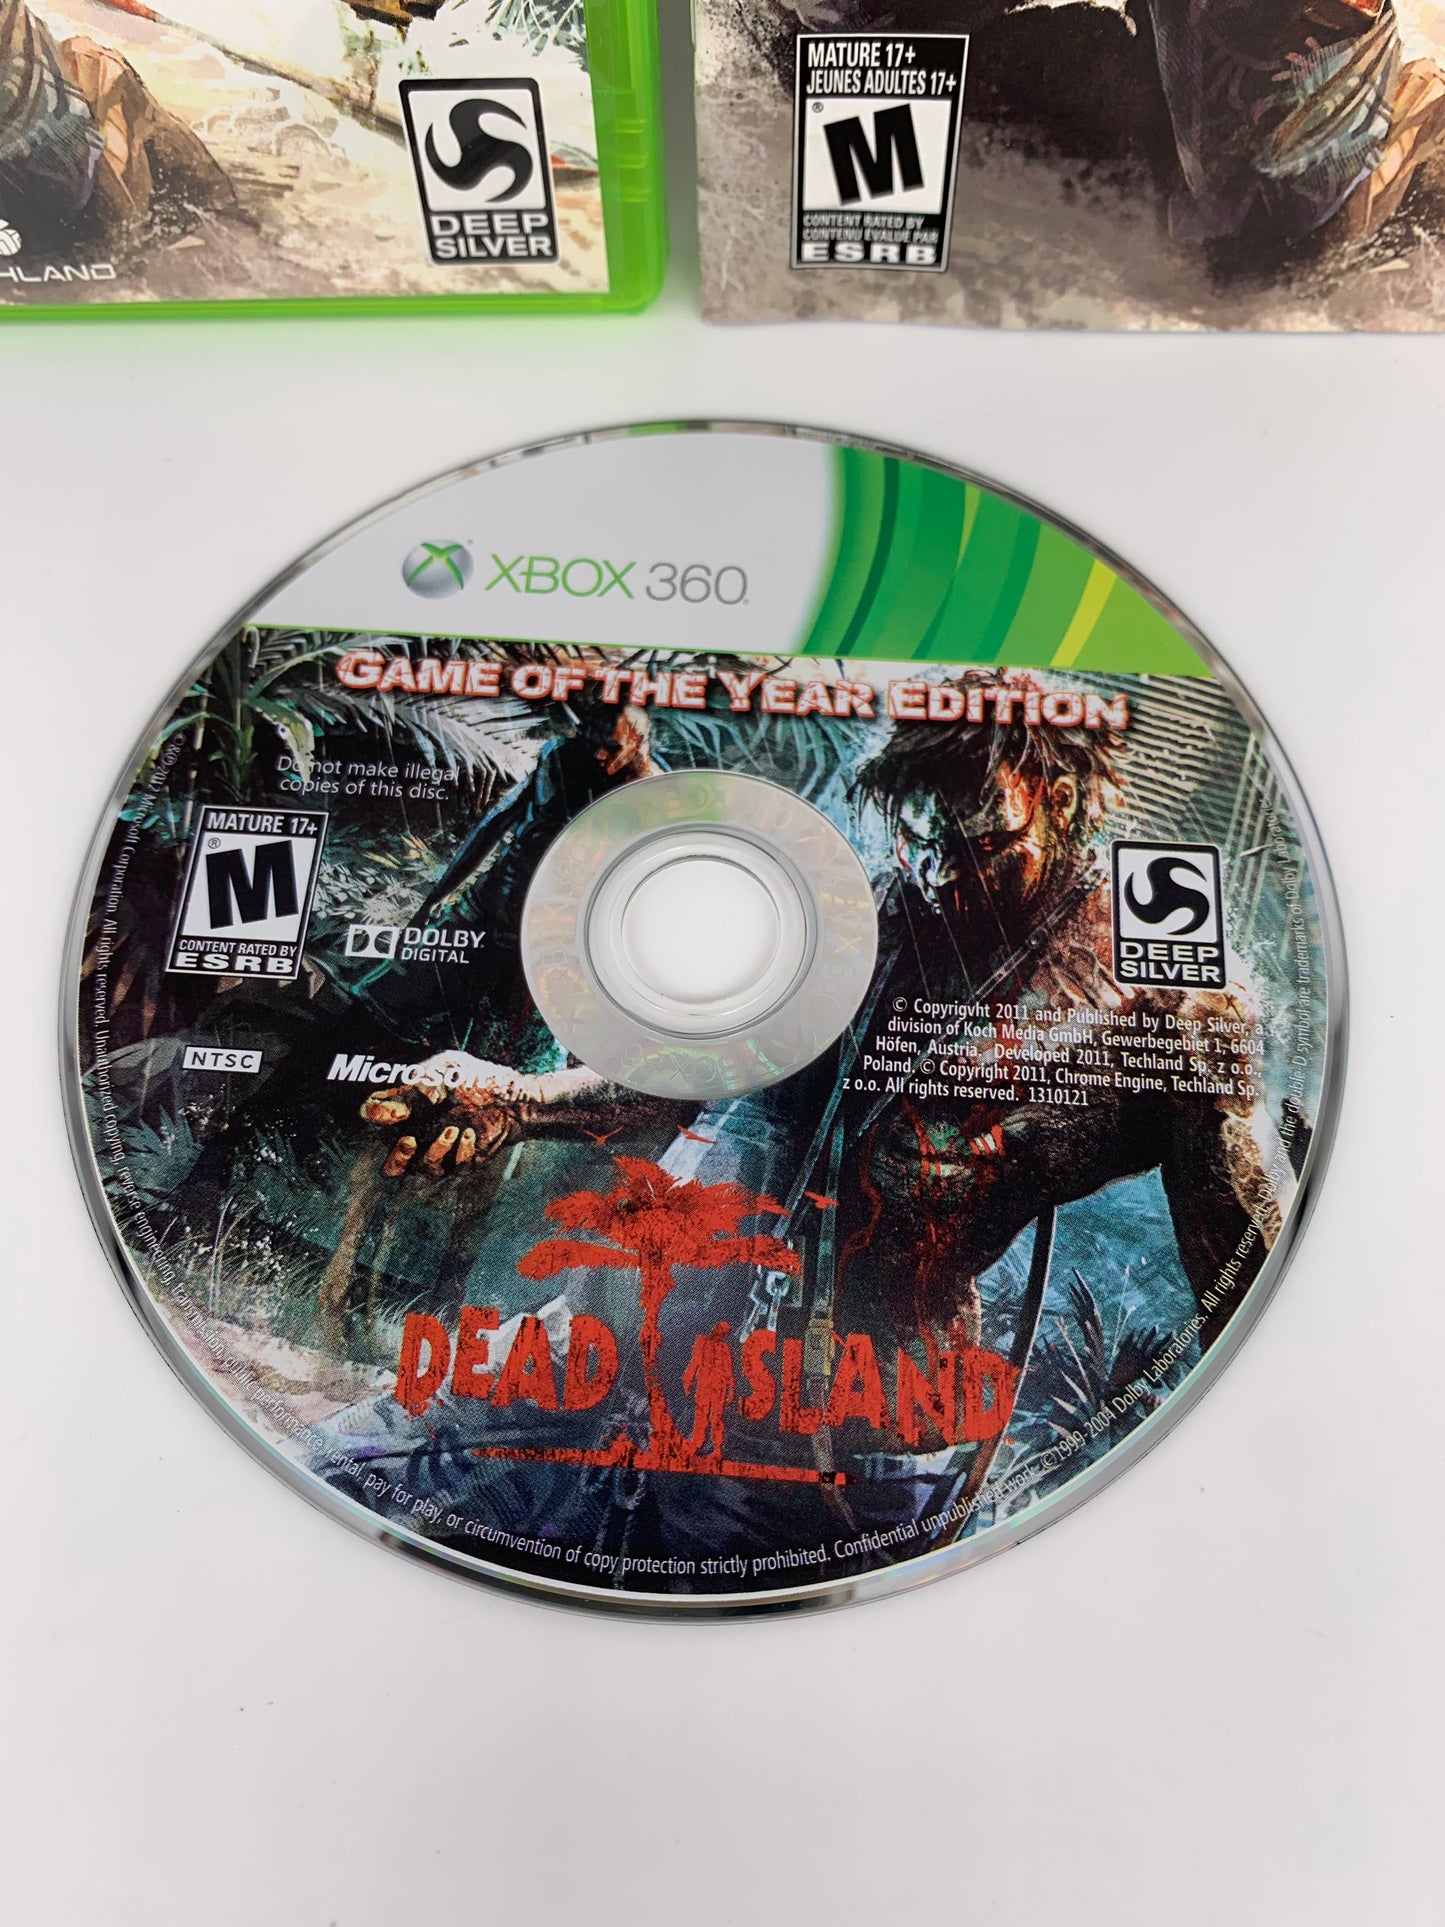 MiCROSOFT XBOX 360 | DEAD iSLAND | GAME OF THE YEAR EDiTiON